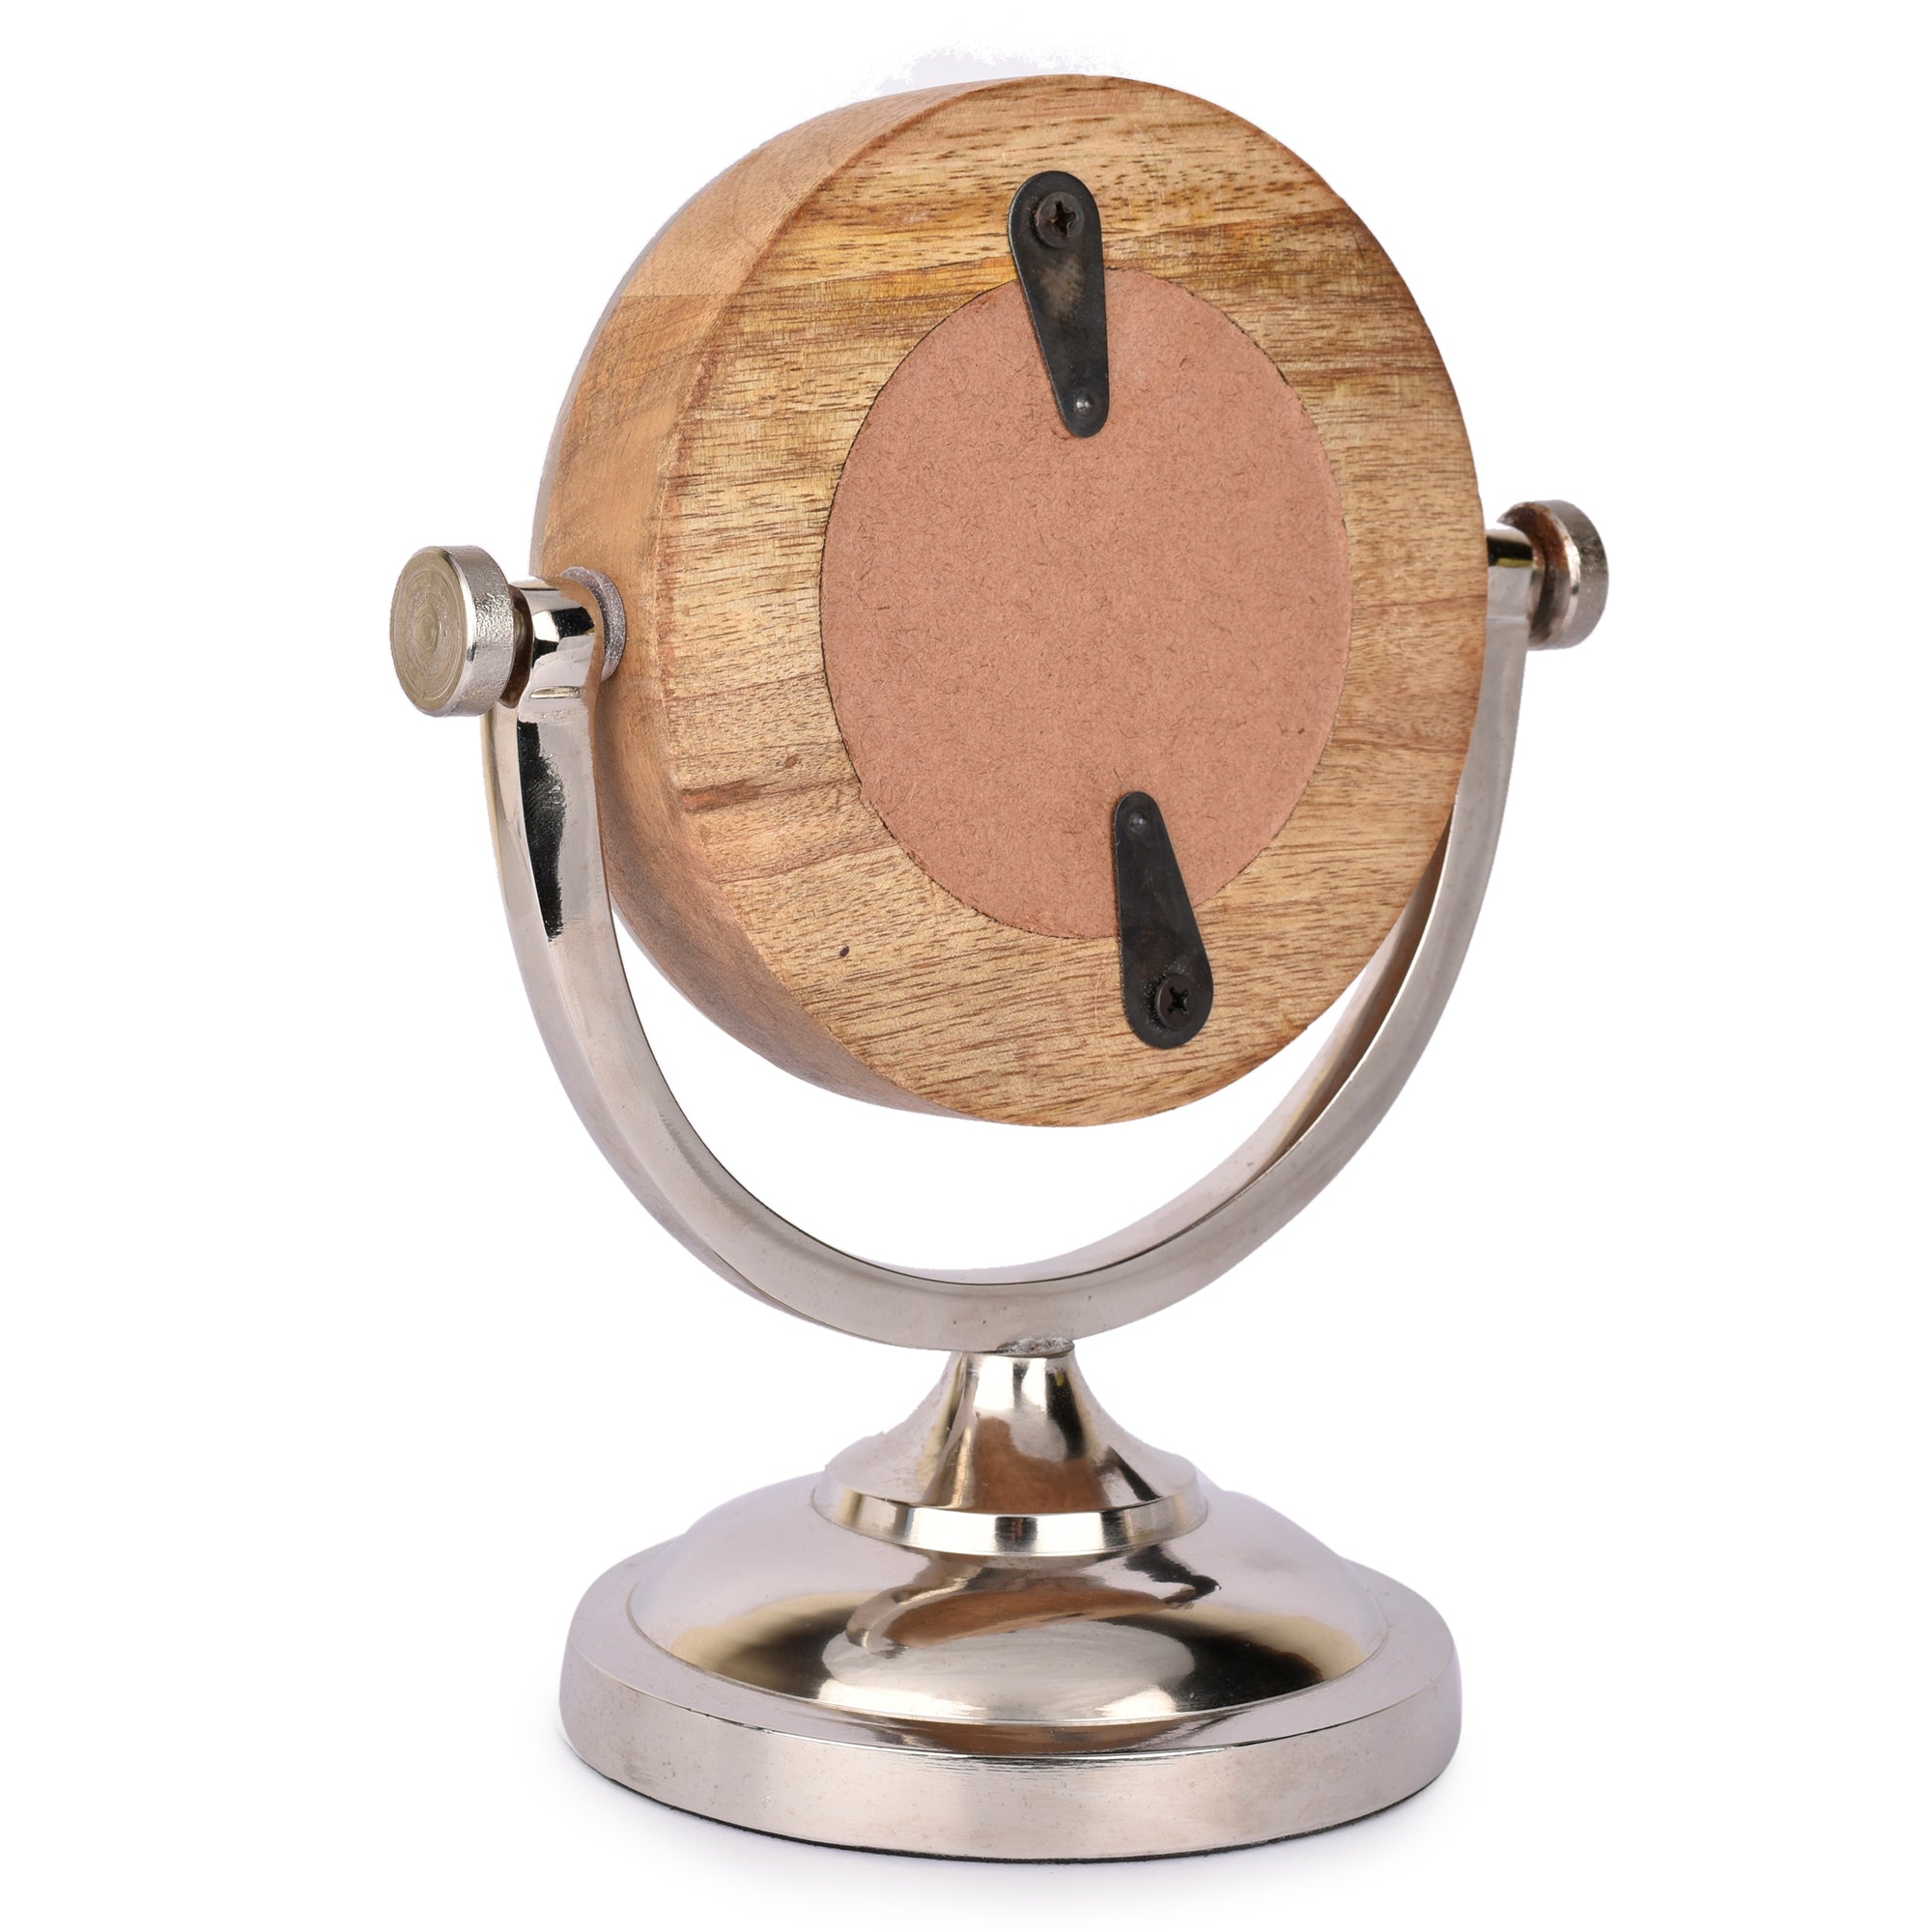 Gina Table Clock 9.5 inches